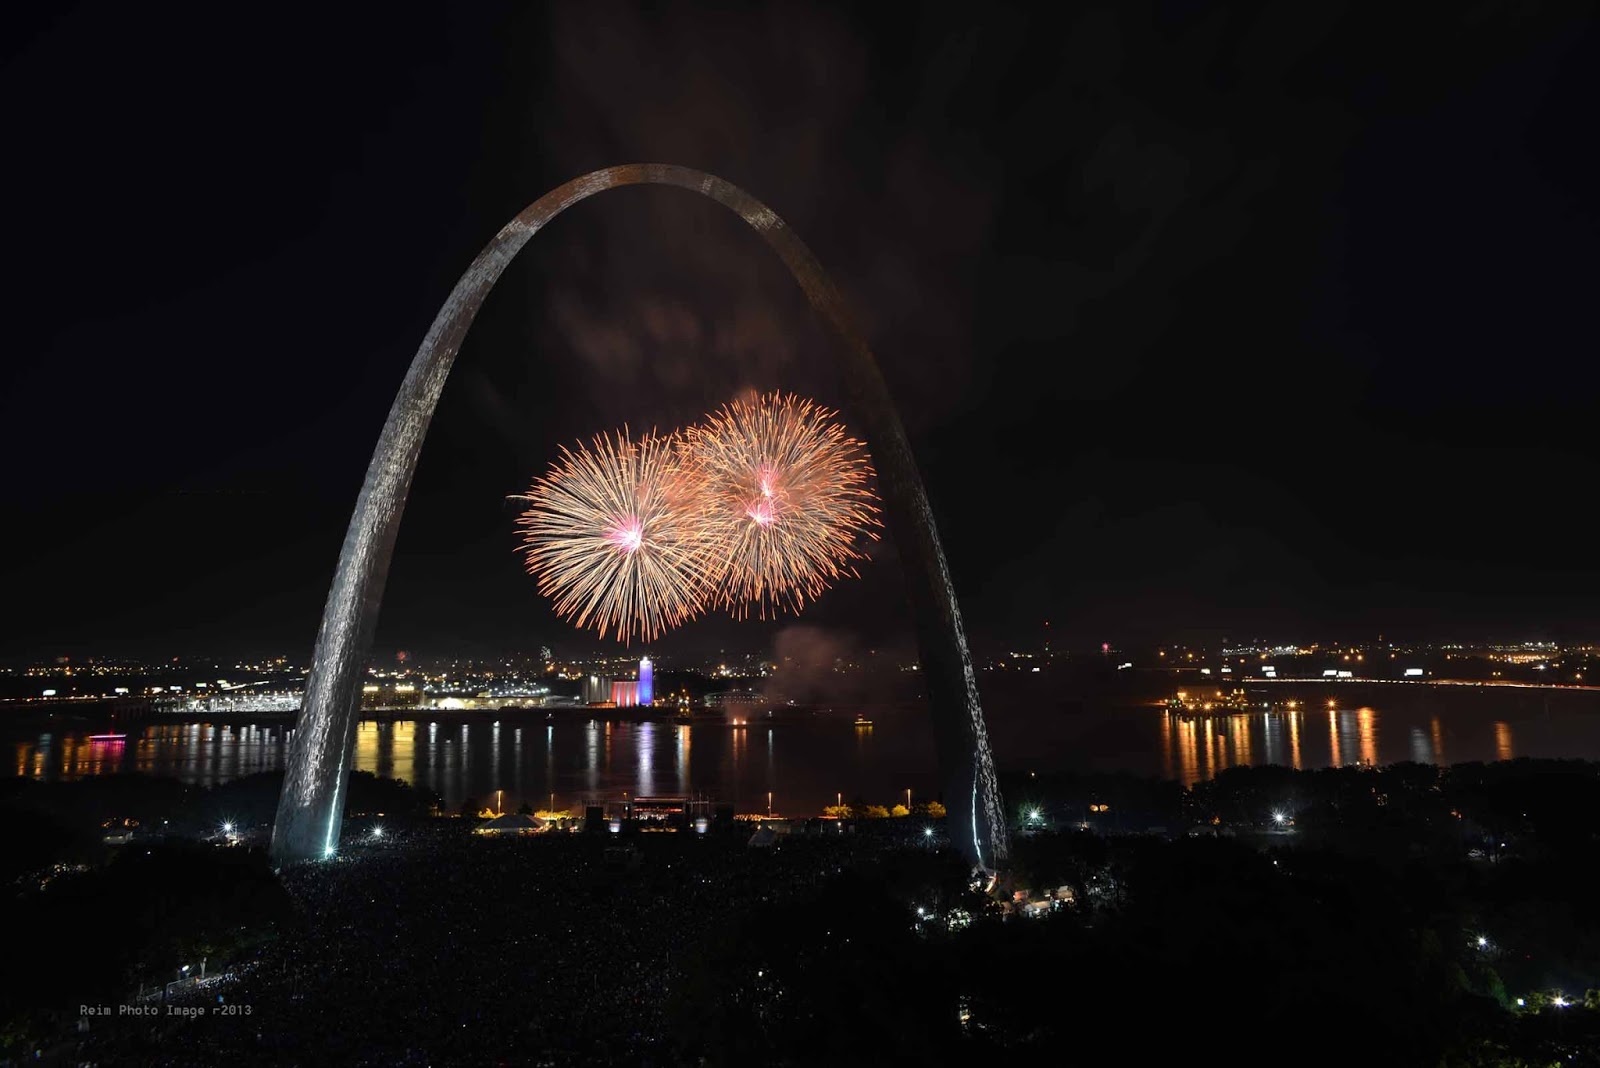 Reim Photo Image St. Louis VP Fair and Fourth of July Celebration